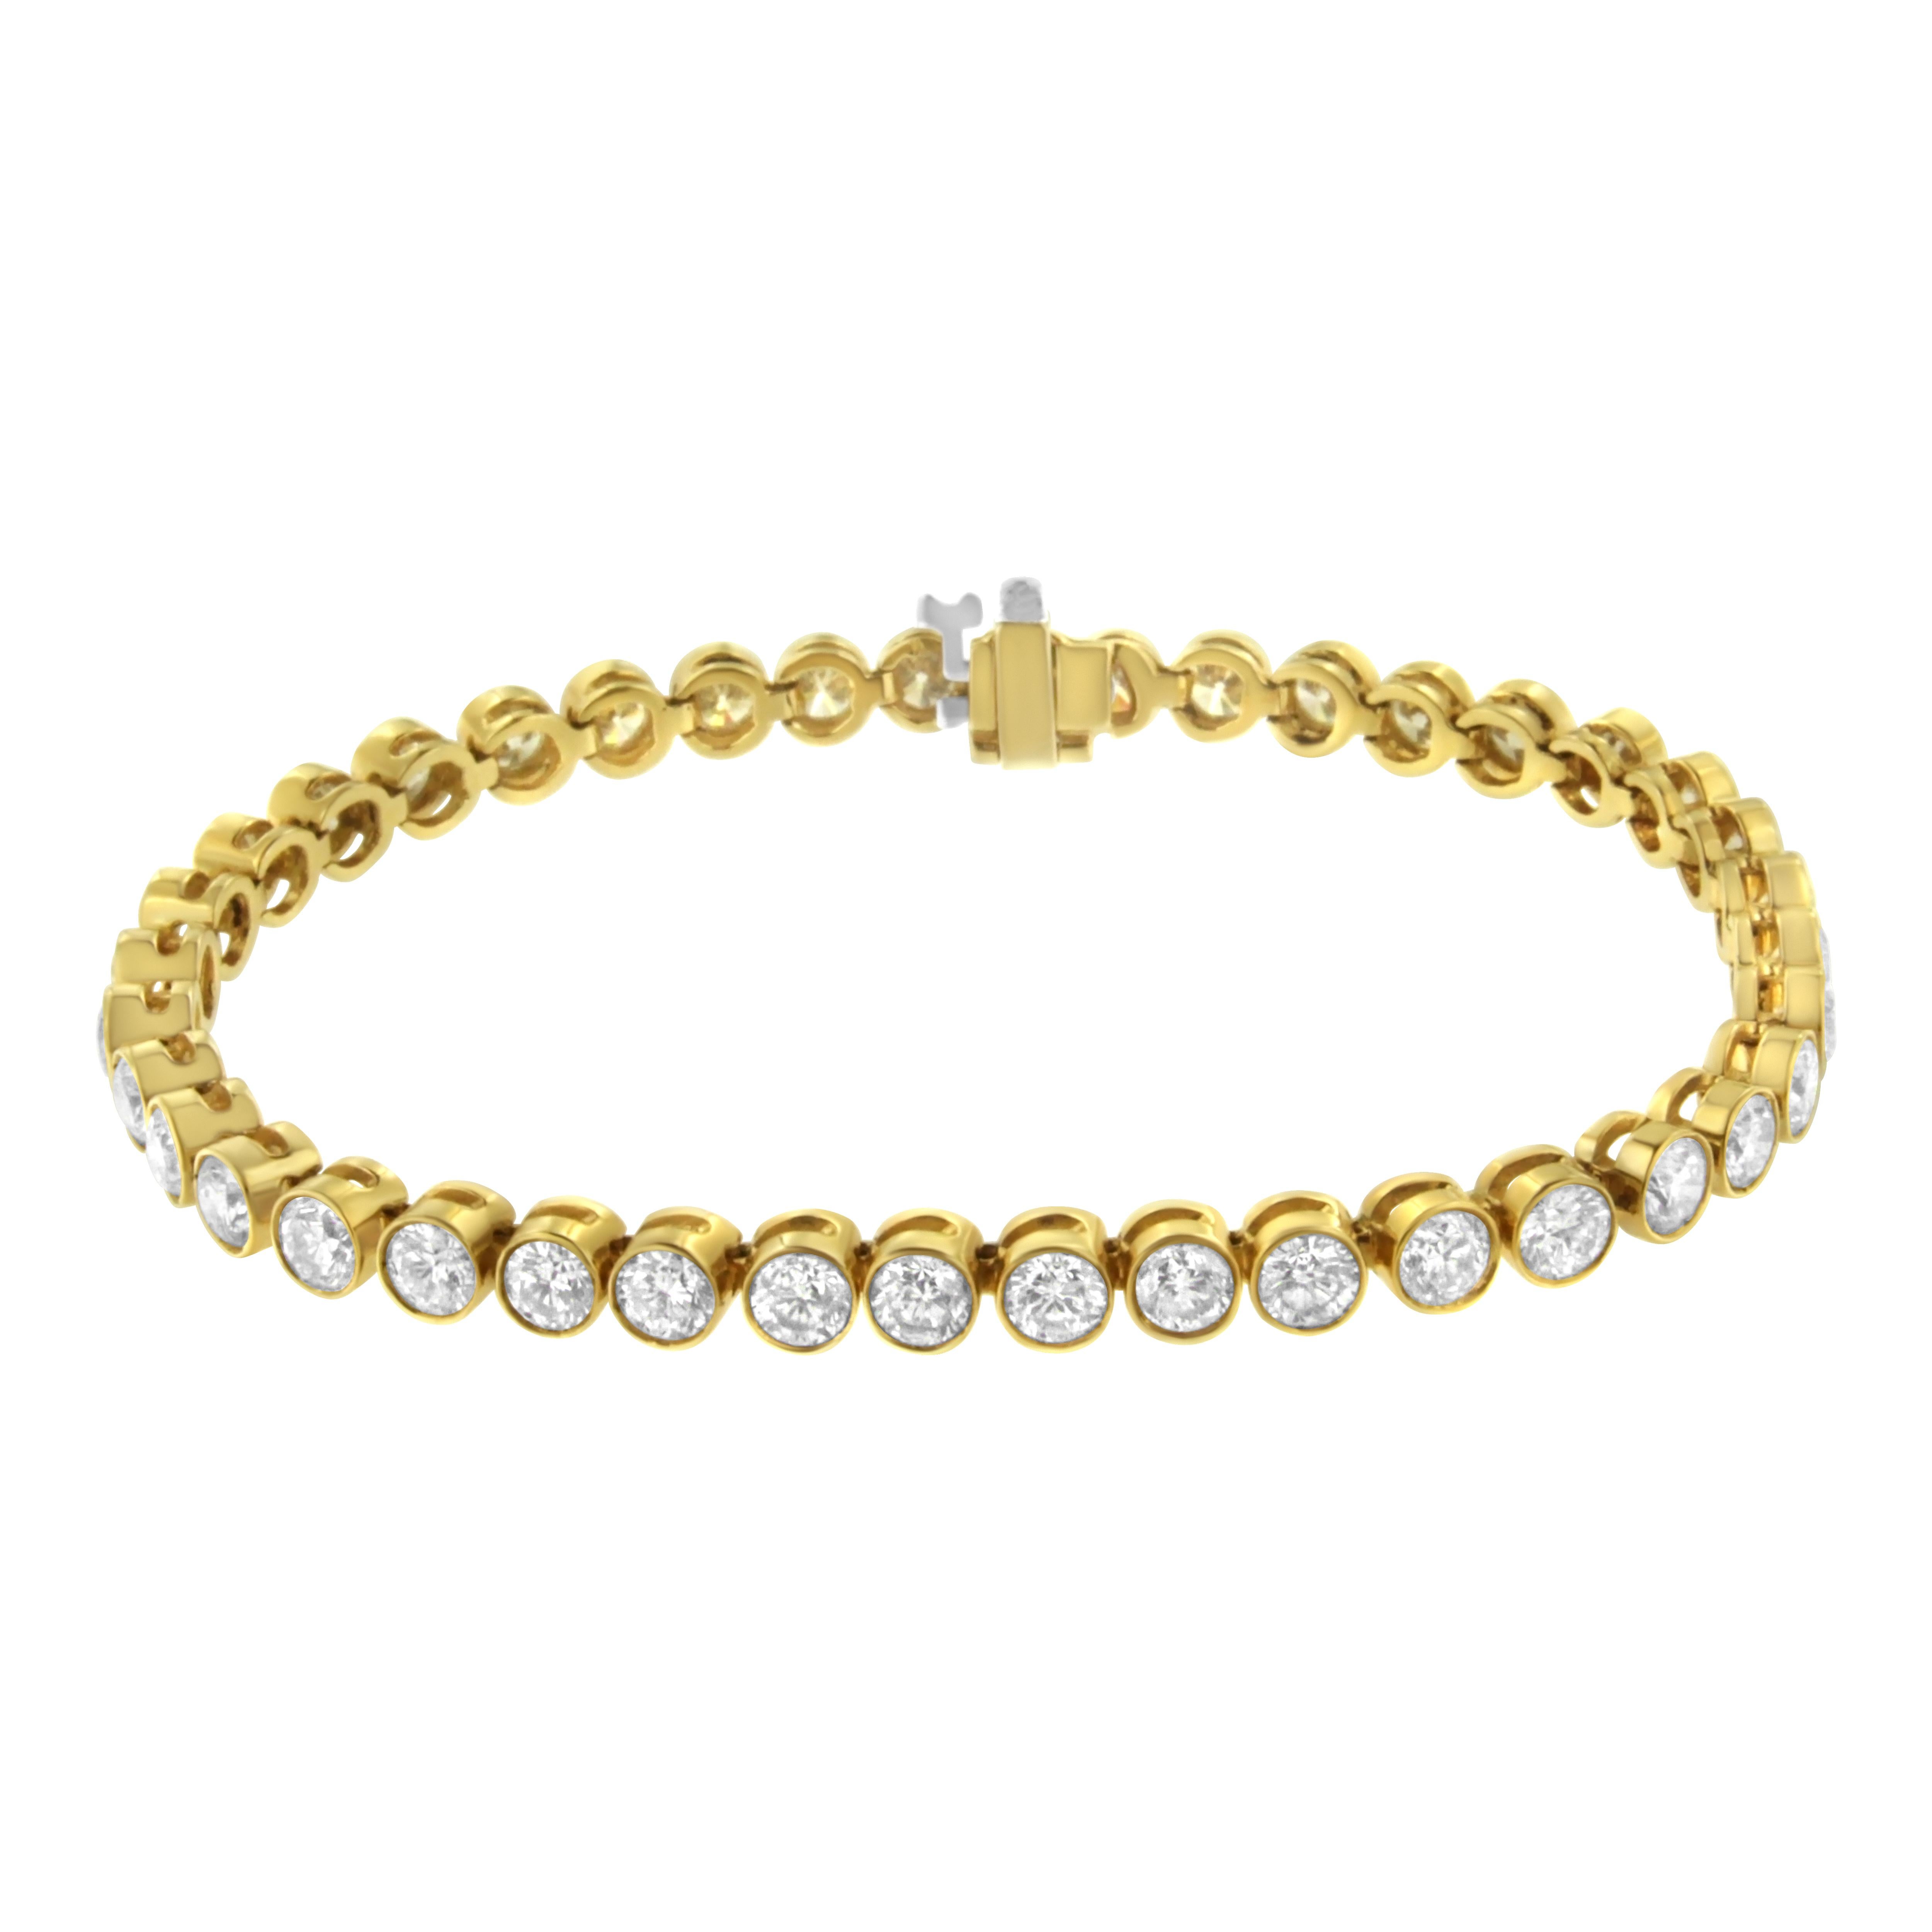 Lend a sophisticated style to her look with this interlinked tennis style bracelet. Fashionable and dazzling, the stunning design features intertwined round motifs in 14 karats yellow gold. And the prong setting of glistening round cut diamonds